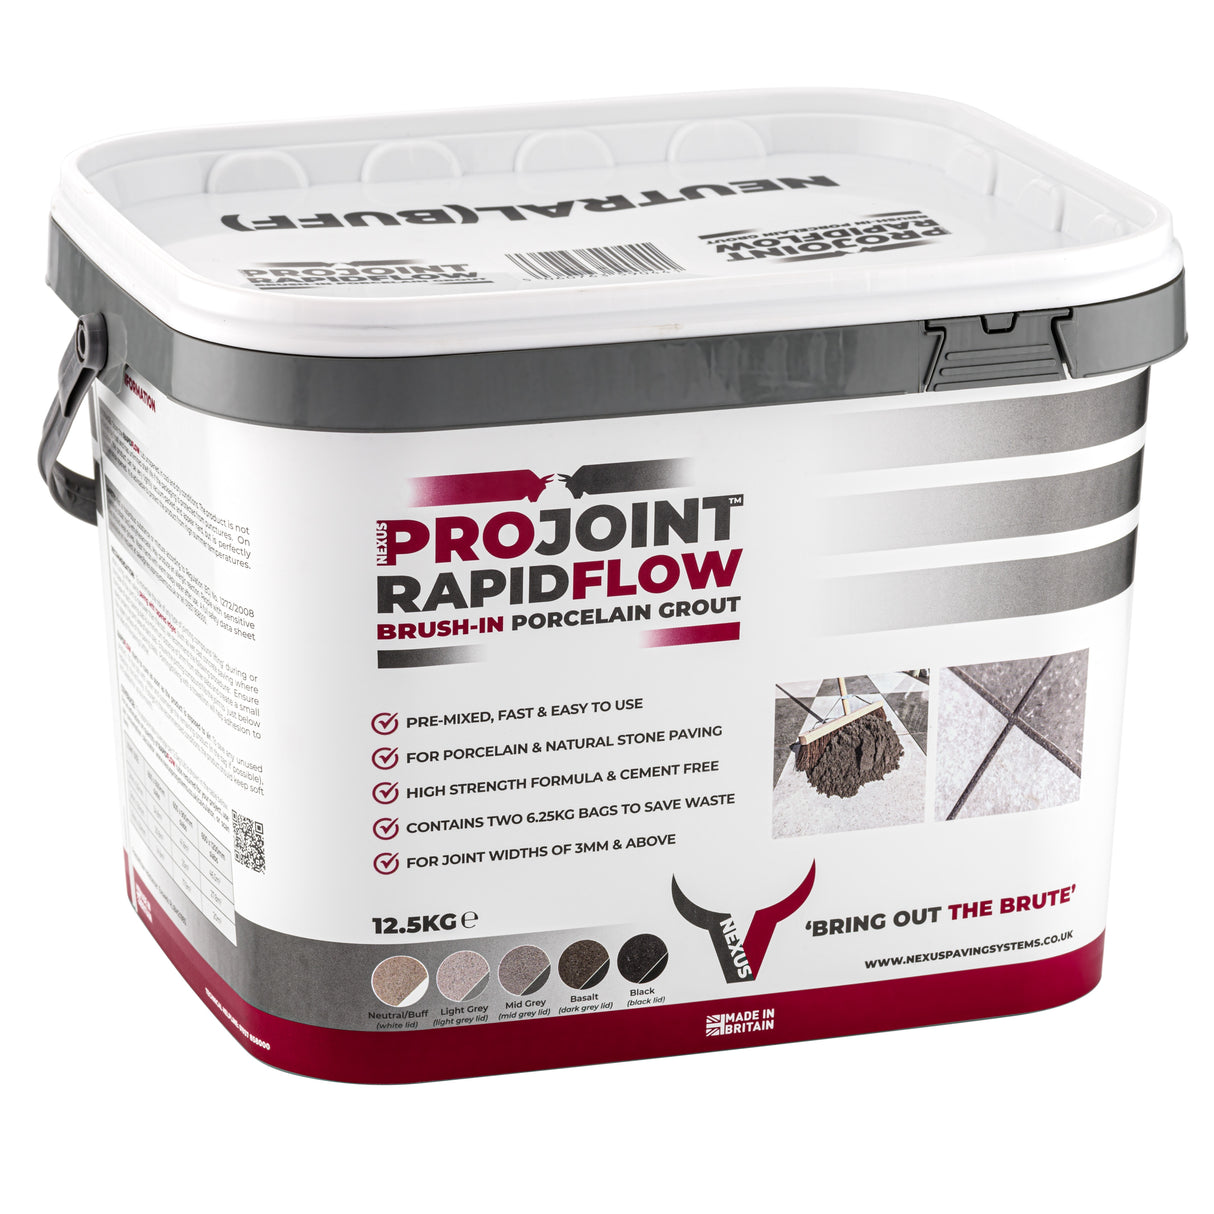 ProJoint Rapidflow Premixed Jointing Compound